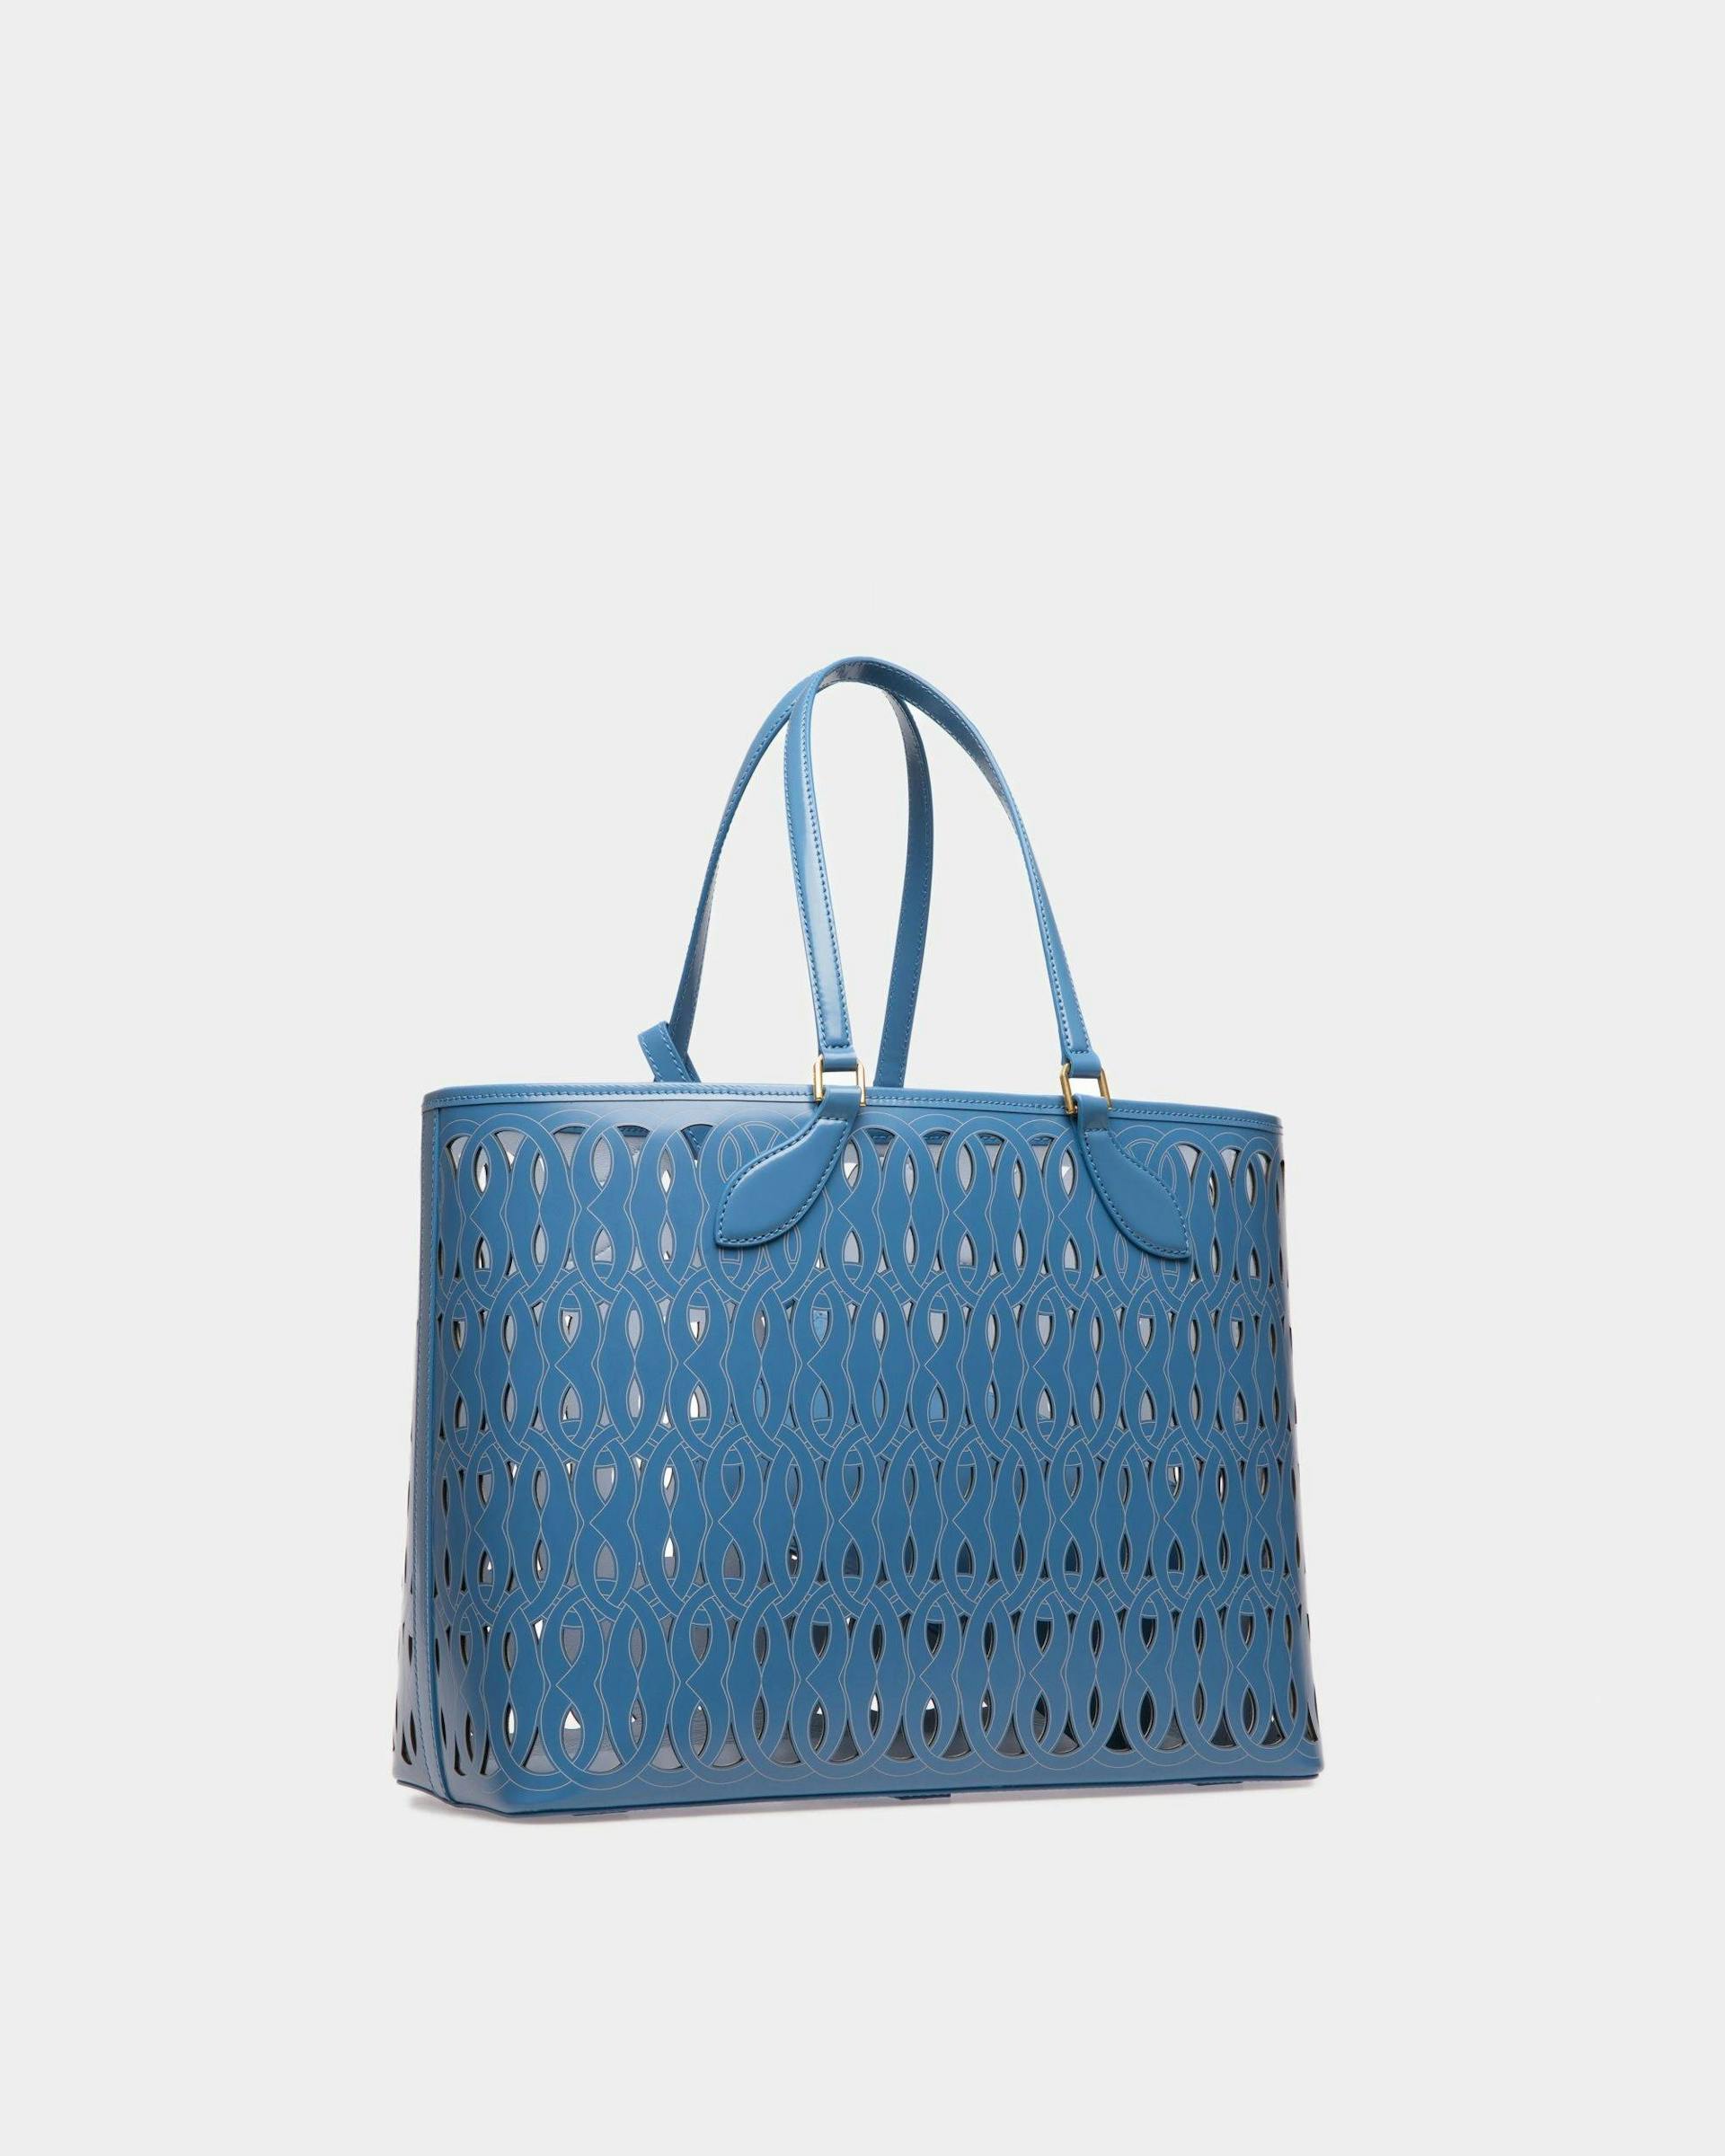 Women's Lago Tote Bag In Blue Leather | Bally | Still Life 3/4 Front